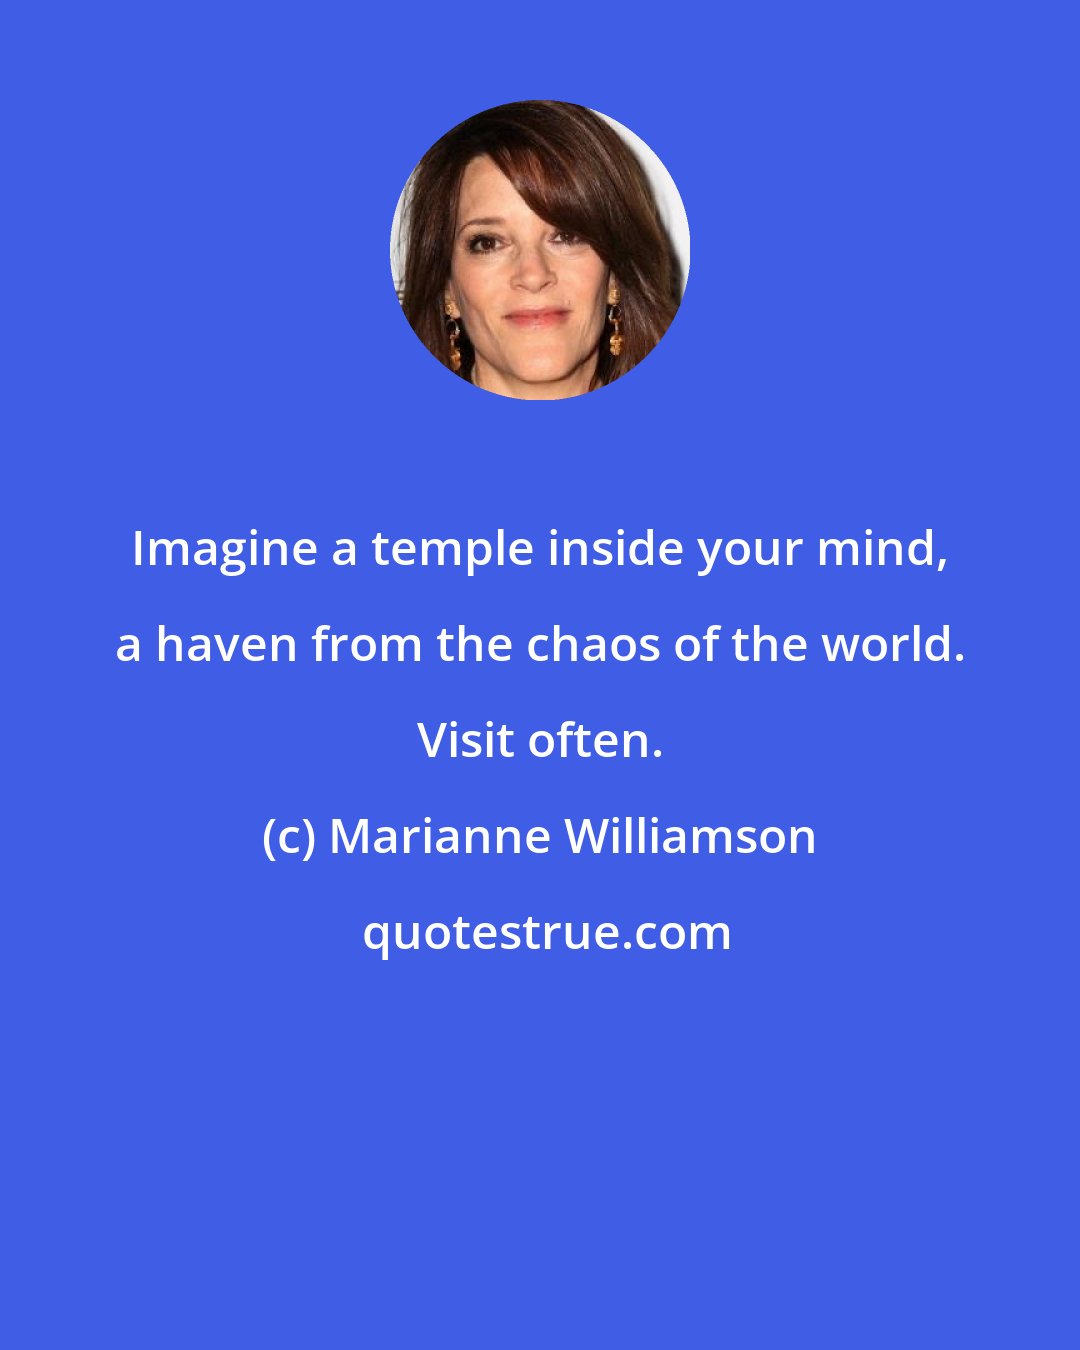 Marianne Williamson: Imagine a temple inside your mind, a haven from the chaos of the world. Visit often.